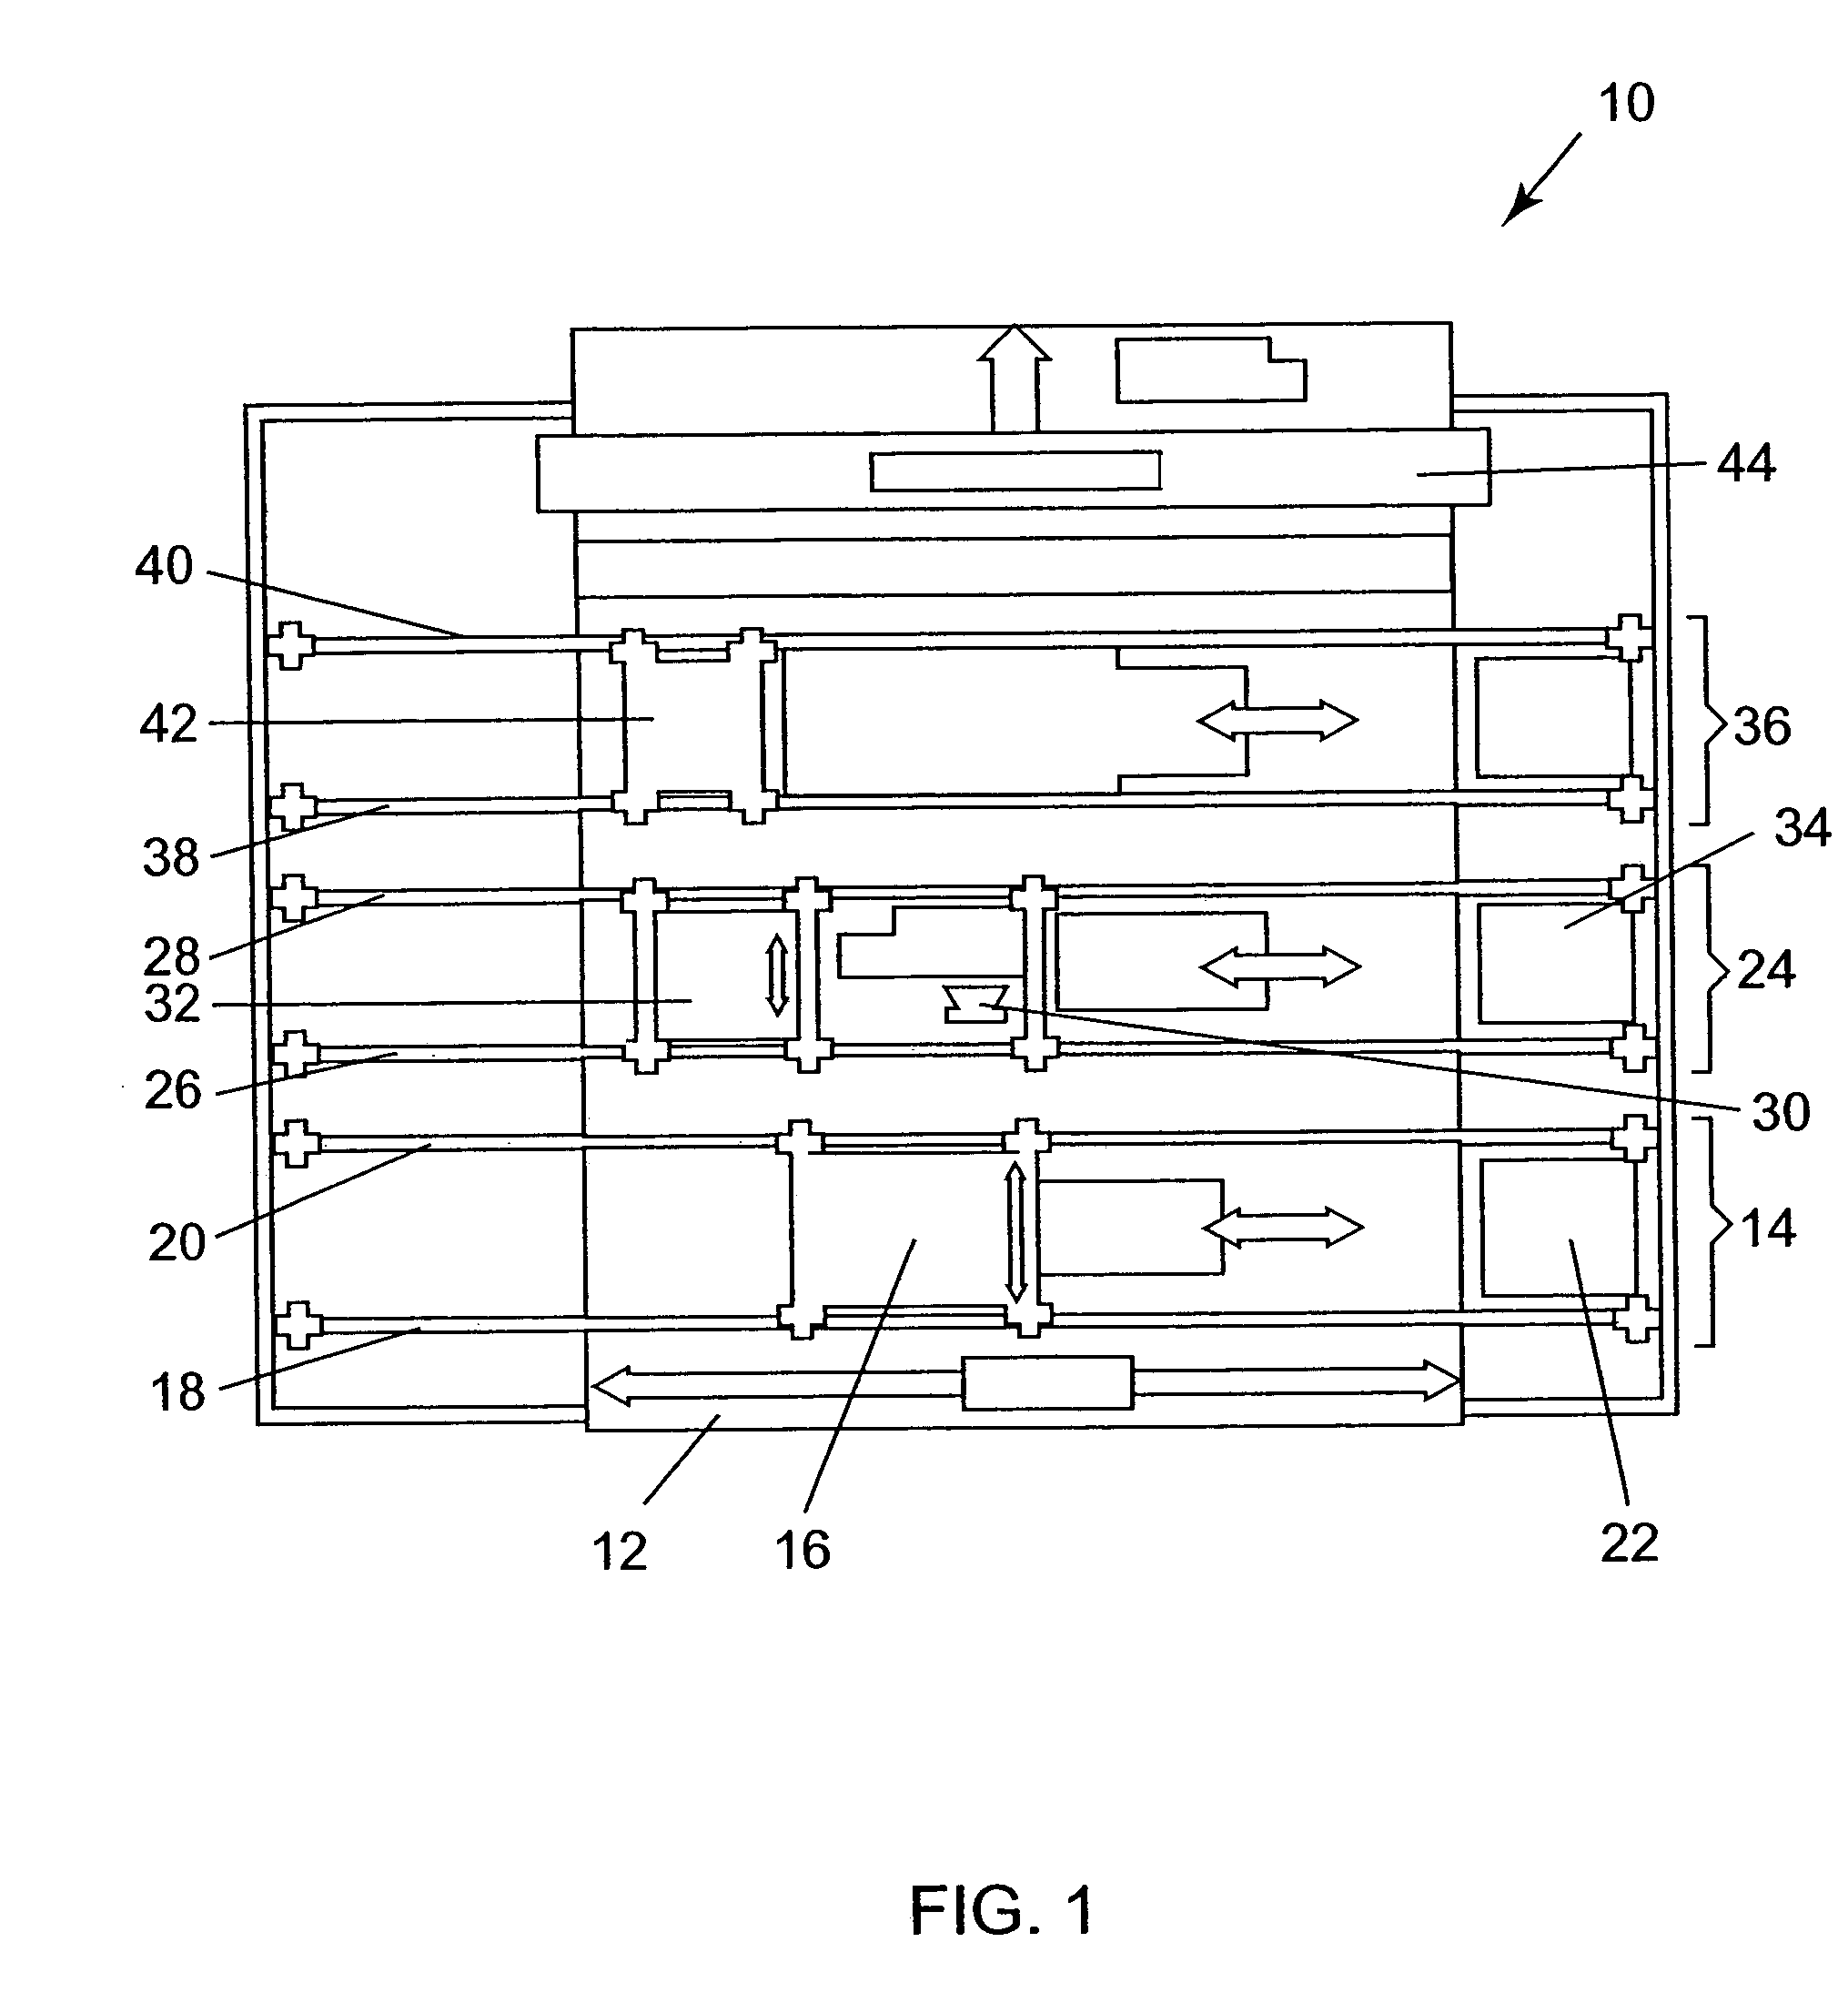 Method of fabricating a belt and a belt used to make bulk tissue and towel, and nonwoven articles and fabrics